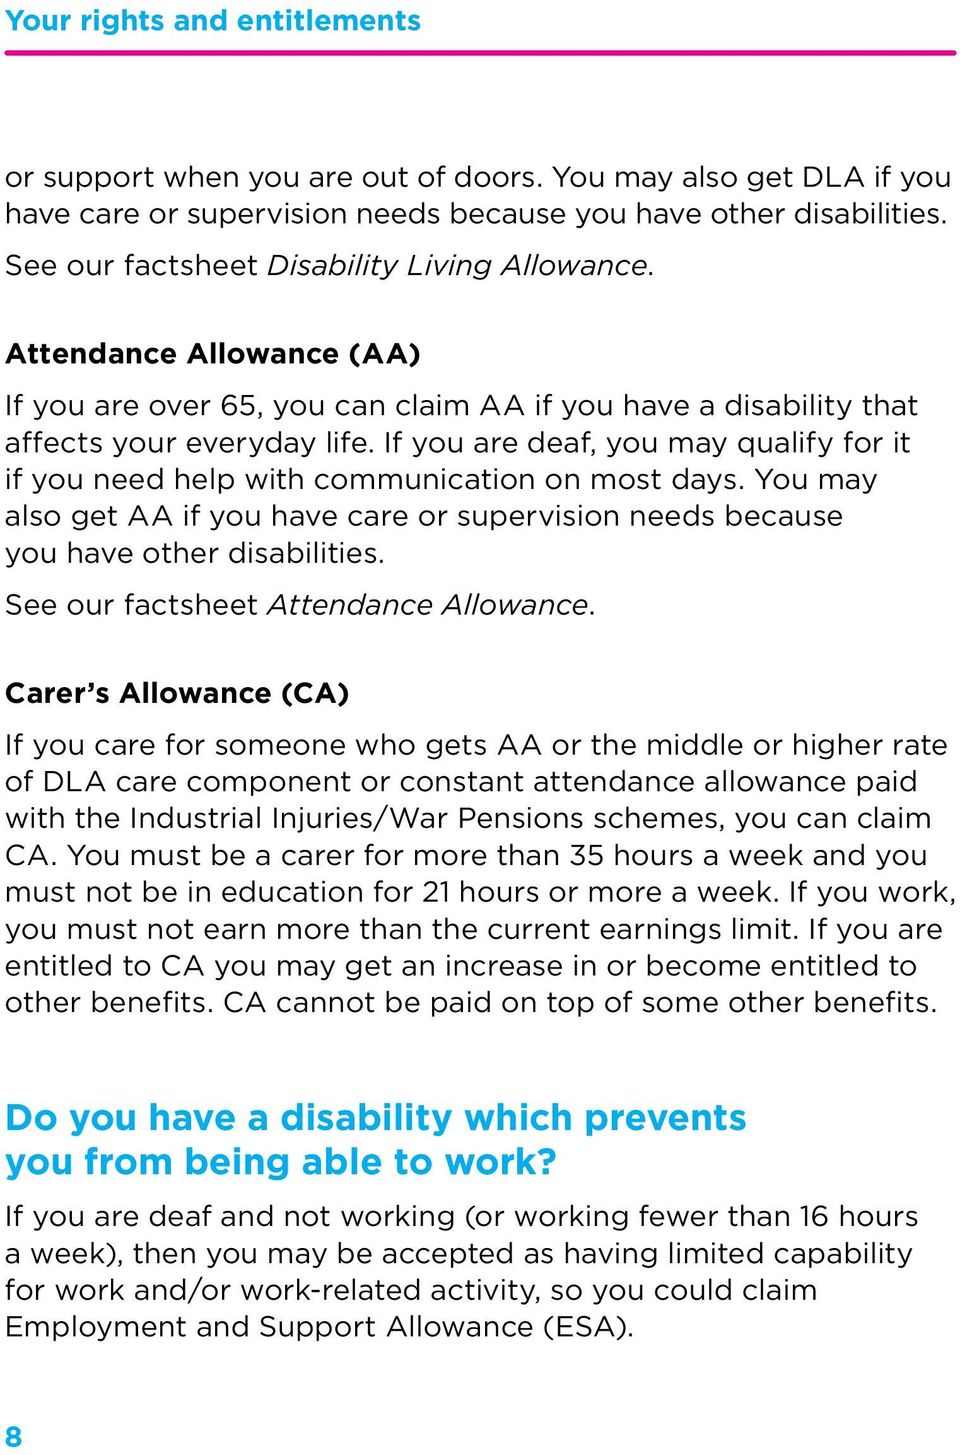 If you are deaf, you may qualify for it if you need help with communication on most days. You may also get AA if you have care or supervision needs because you have other disabilities.